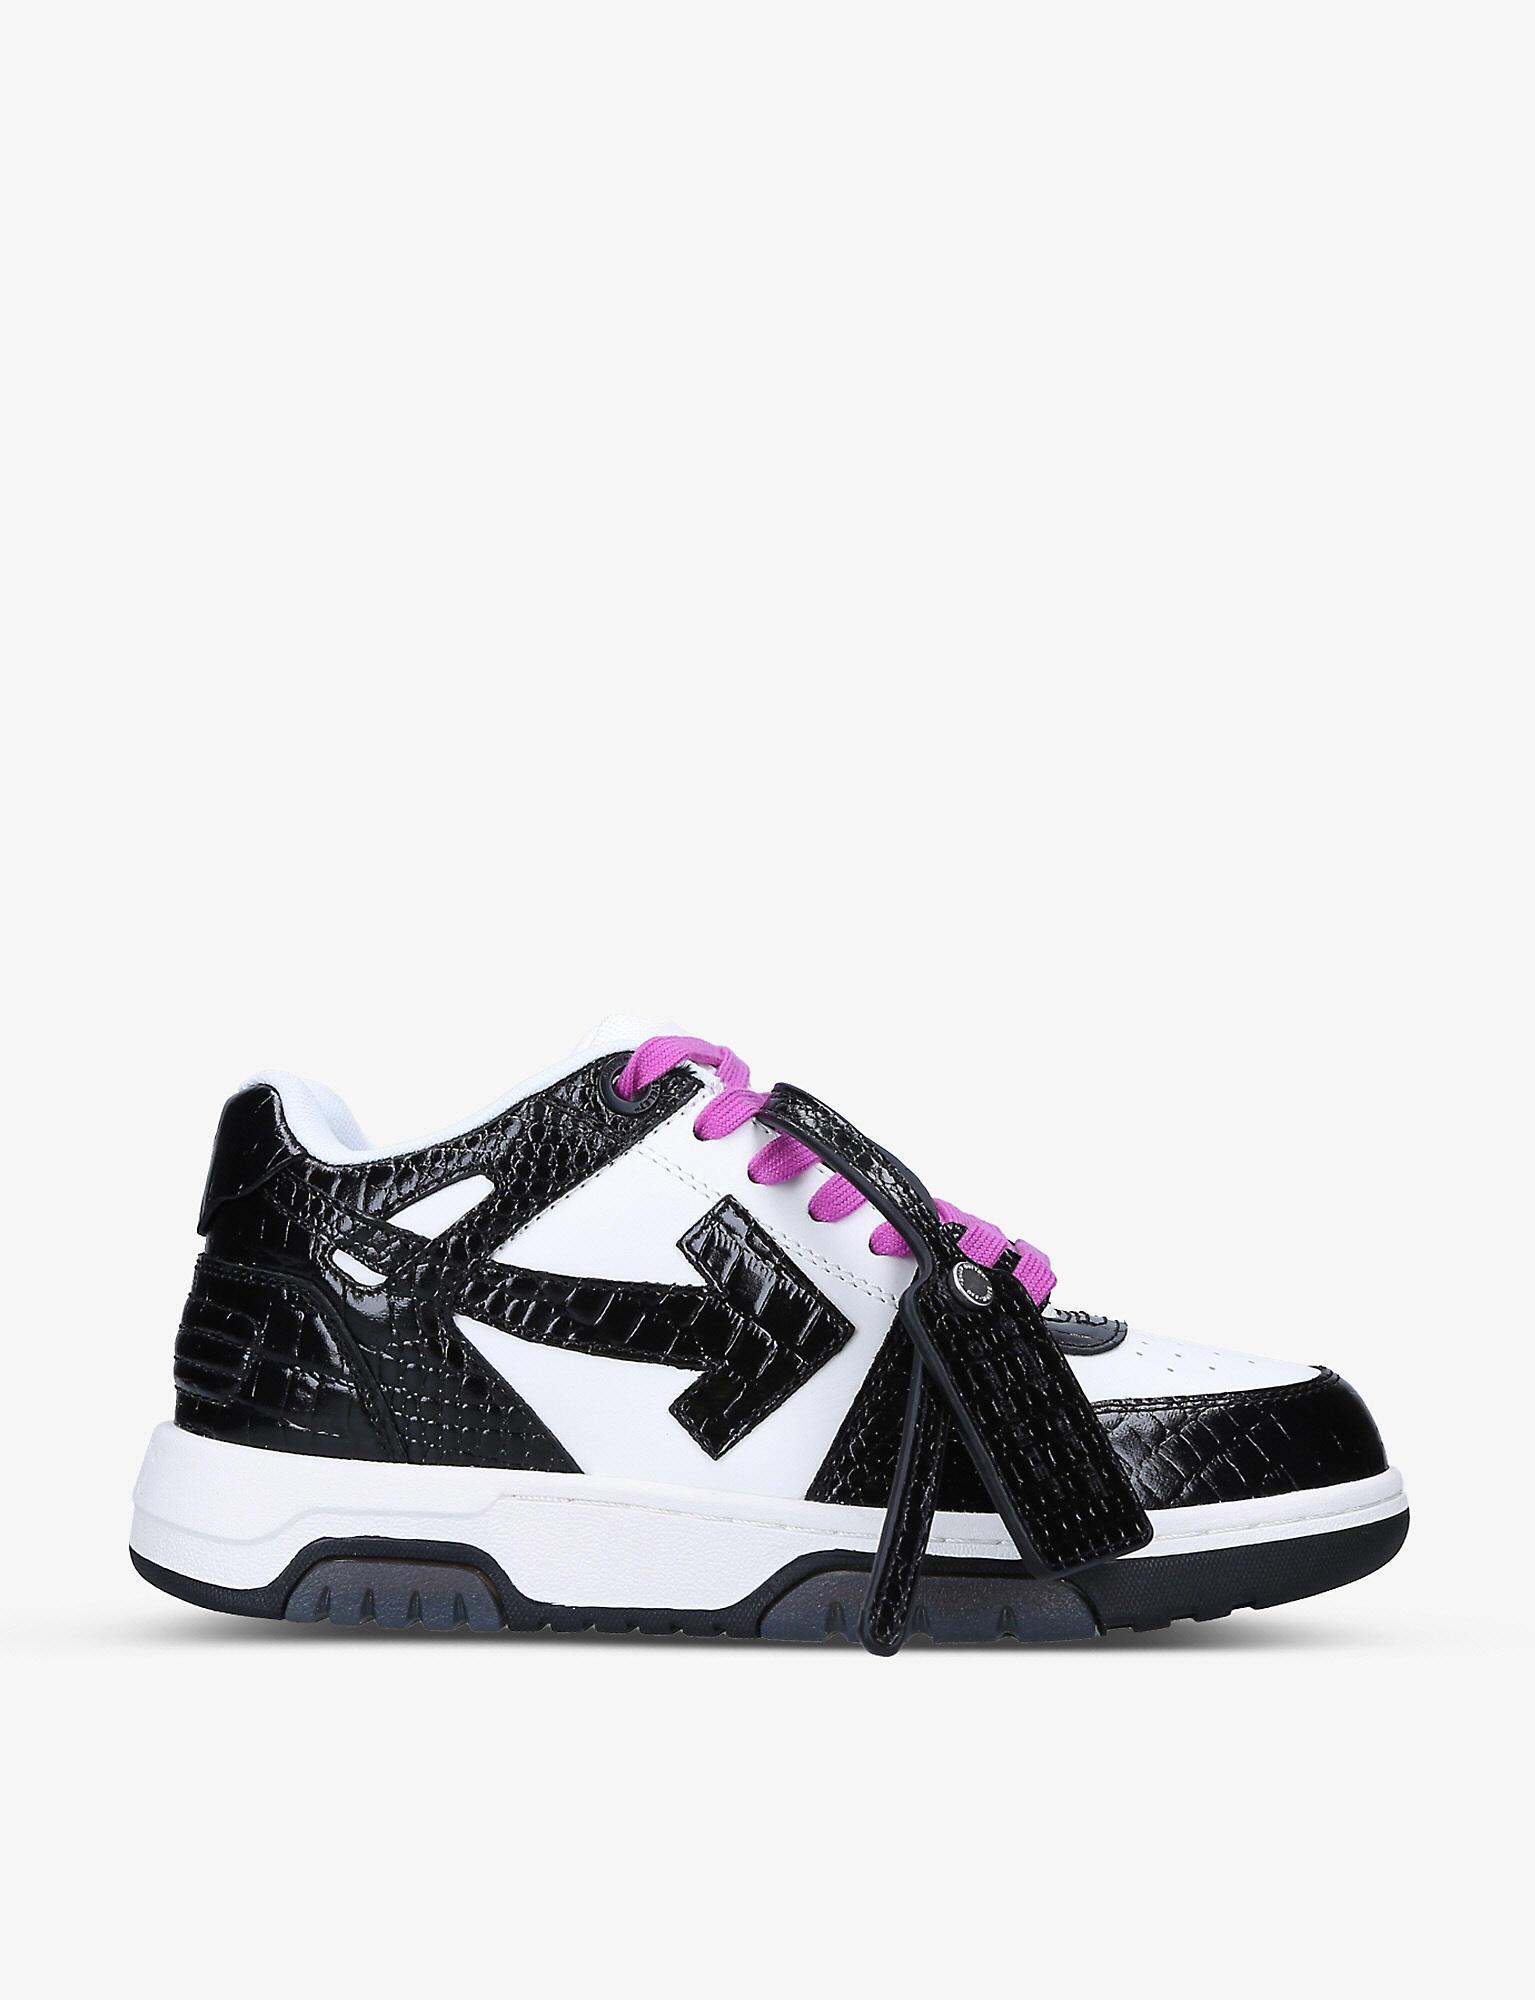 Off-White c/o Virgil Abloh Ooo Low-top Croc-effect Leather Trainers | Lyst